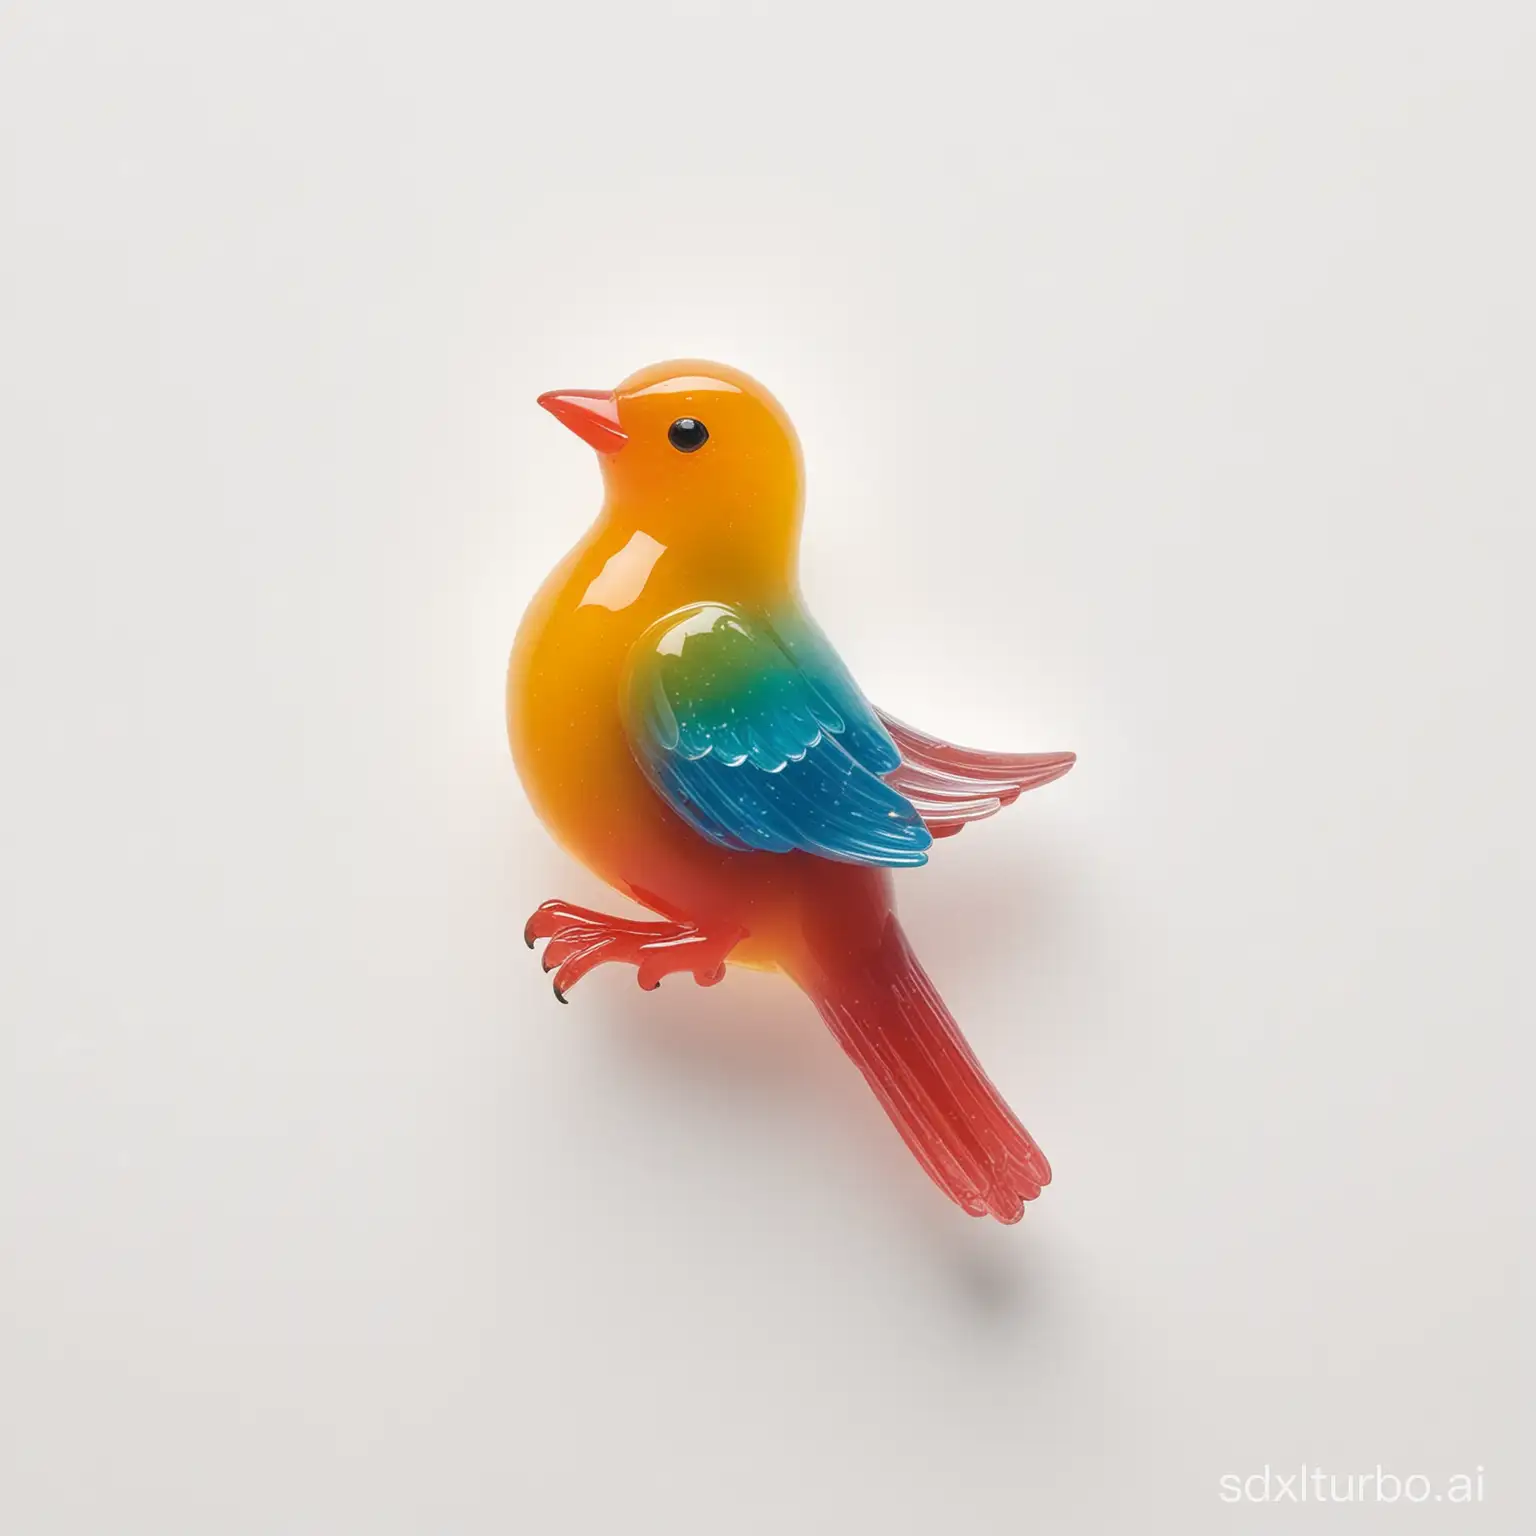 Top-down photograph of a single gummy bird, glossy finish, in juicy colors, pure white background